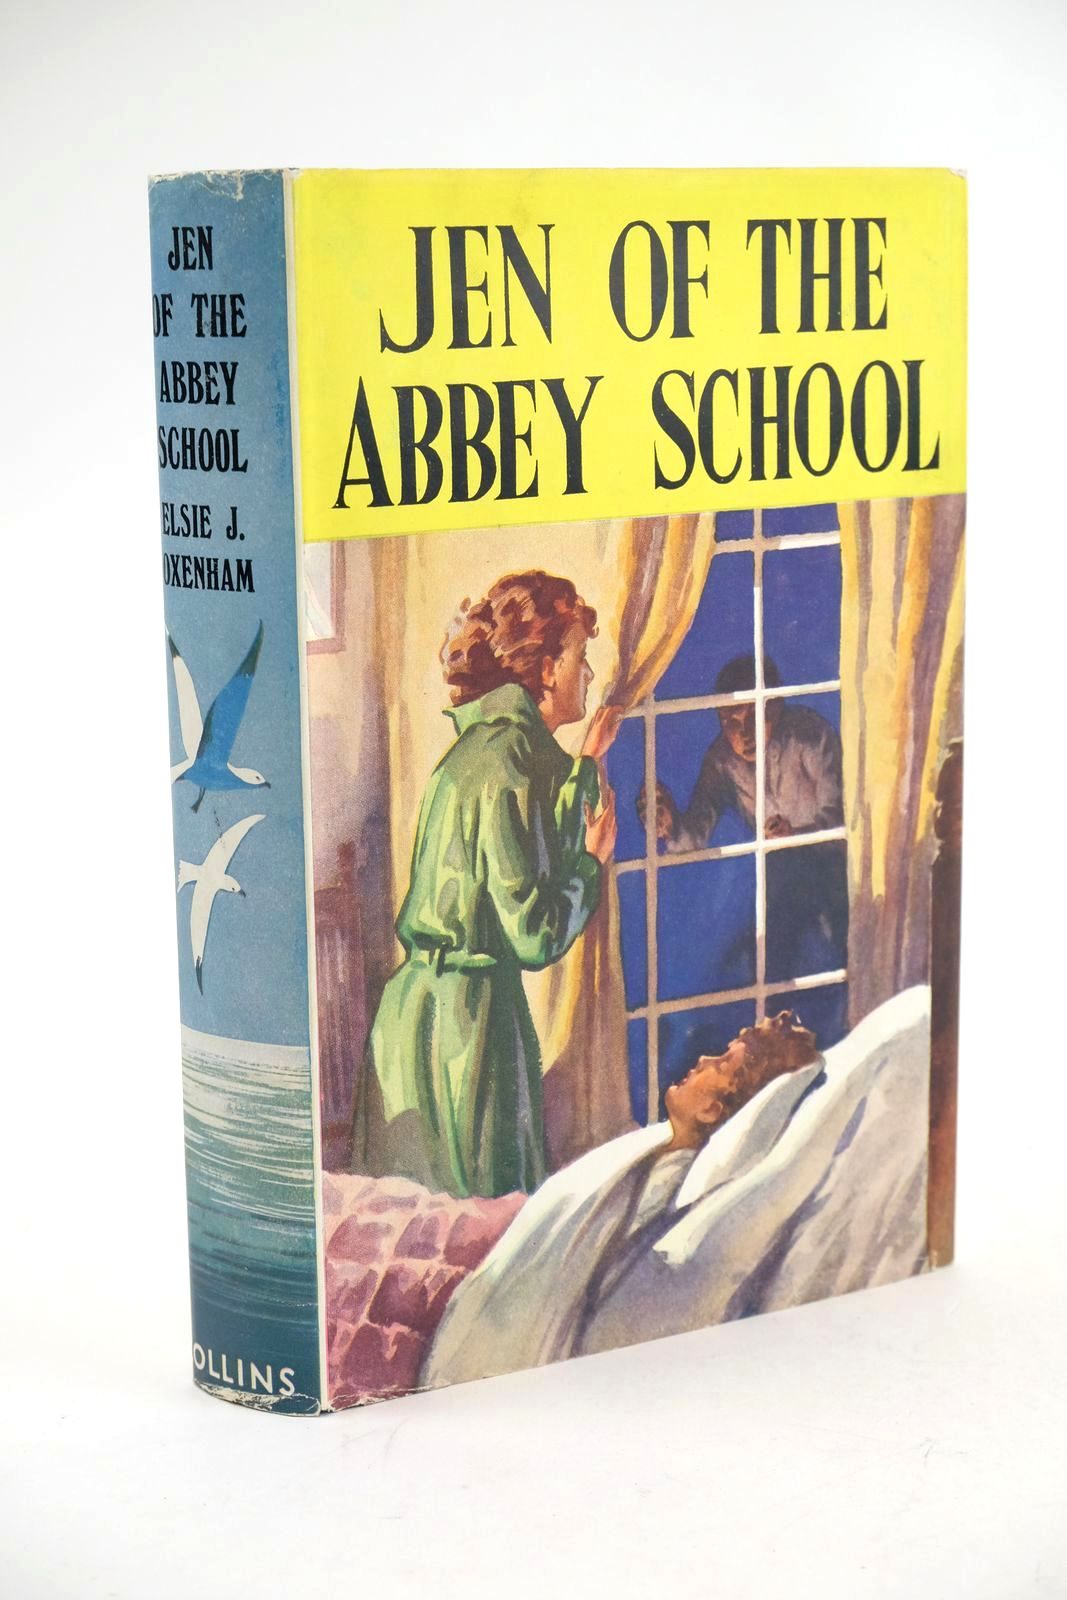 Photo of JEN OF THE ABBEY SCHOOL written by Oxenham, Elsie J. published by Collins (STOCK CODE: 1324509)  for sale by Stella & Rose's Books